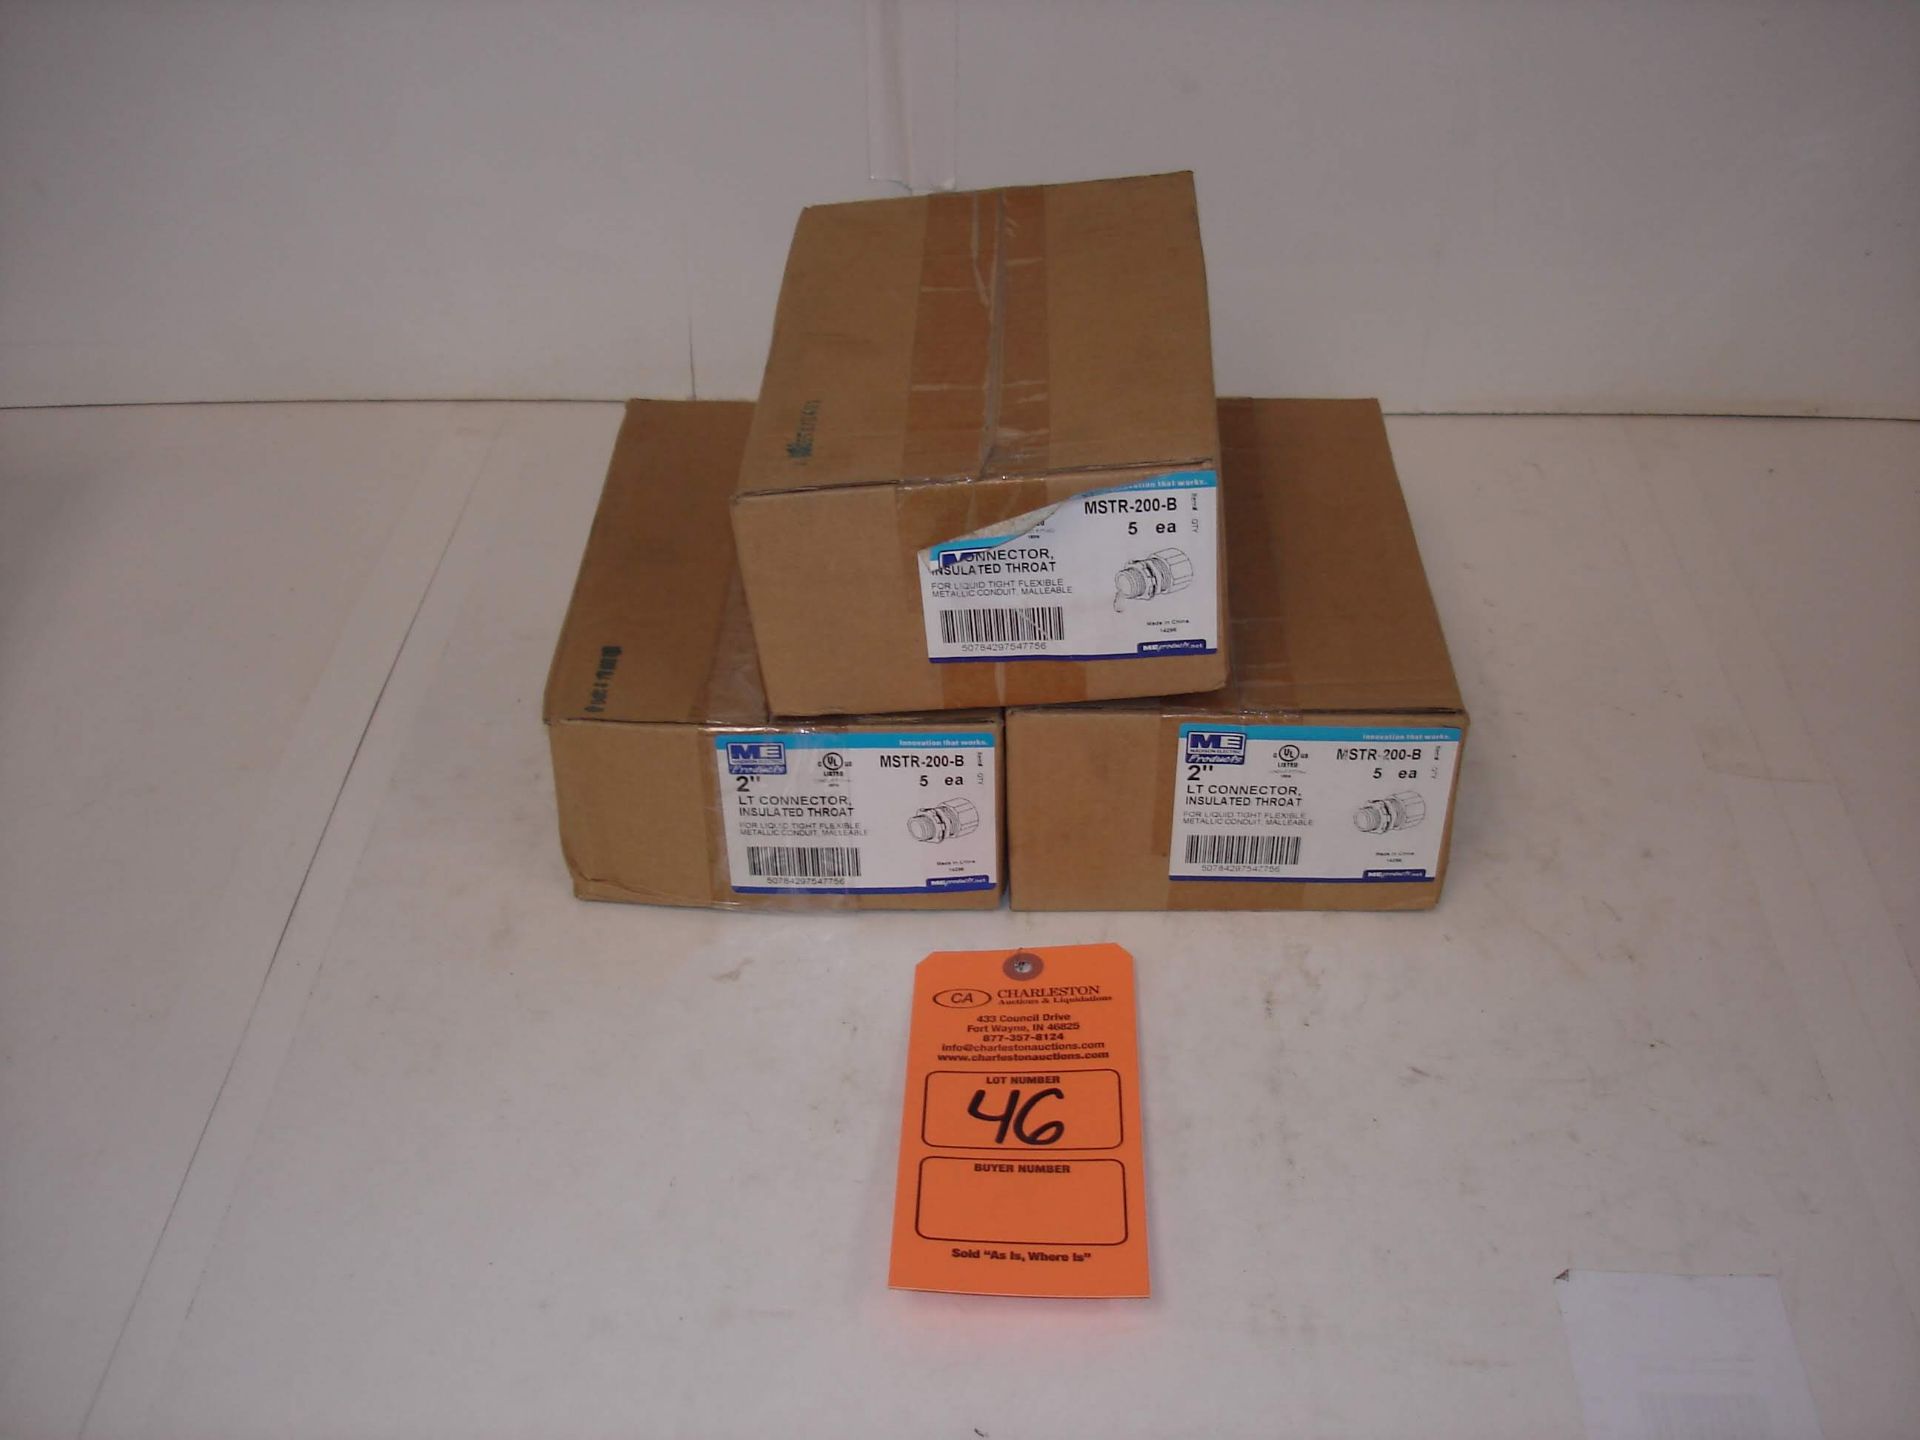 (3 BOXES/5 PER BOX) BRAND NEW MADISON ELECTRIC LT CONNECTOR MSTR-200-B (LOCATED AT: 1200 KIBBY